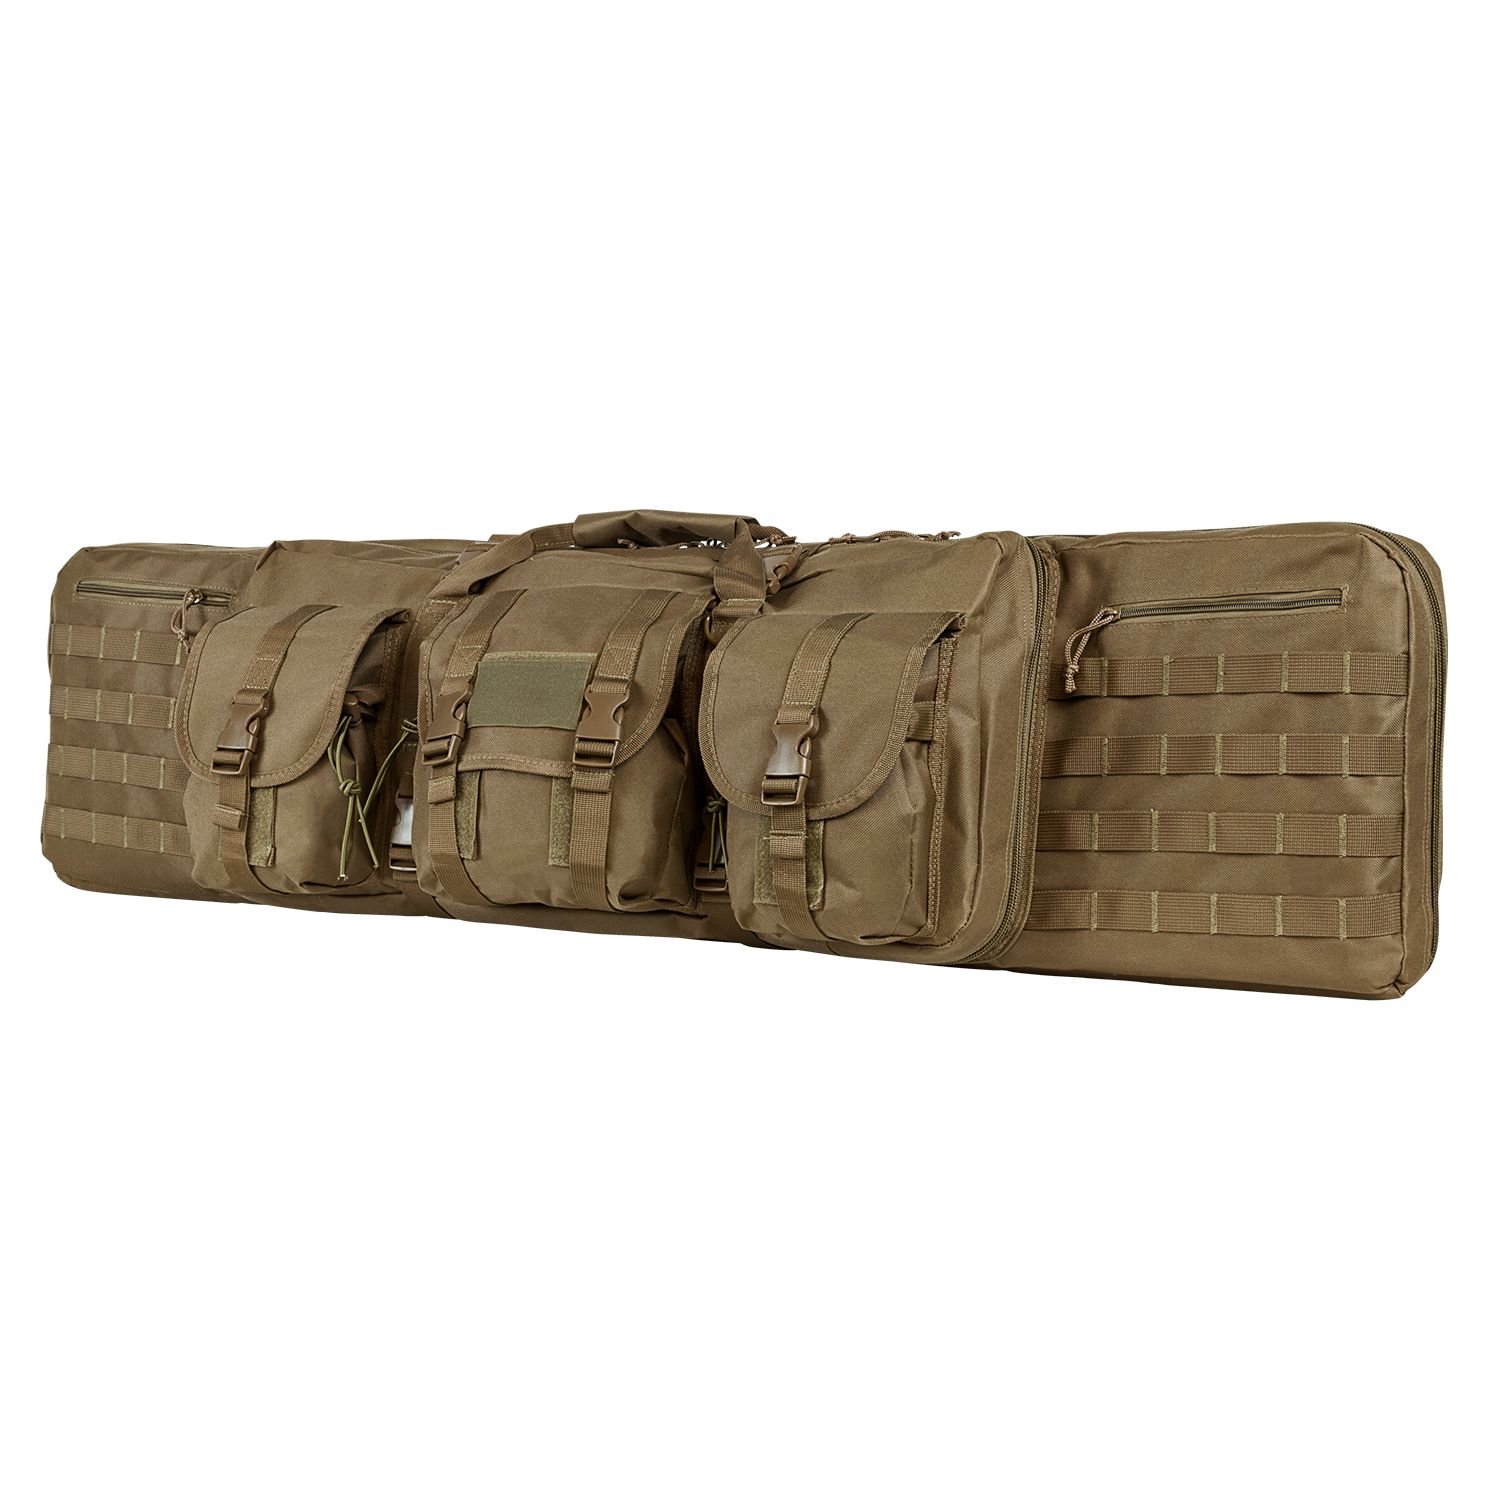 Vism Deluxe Double Rifle Case 55 inL x 13 inH-Tan